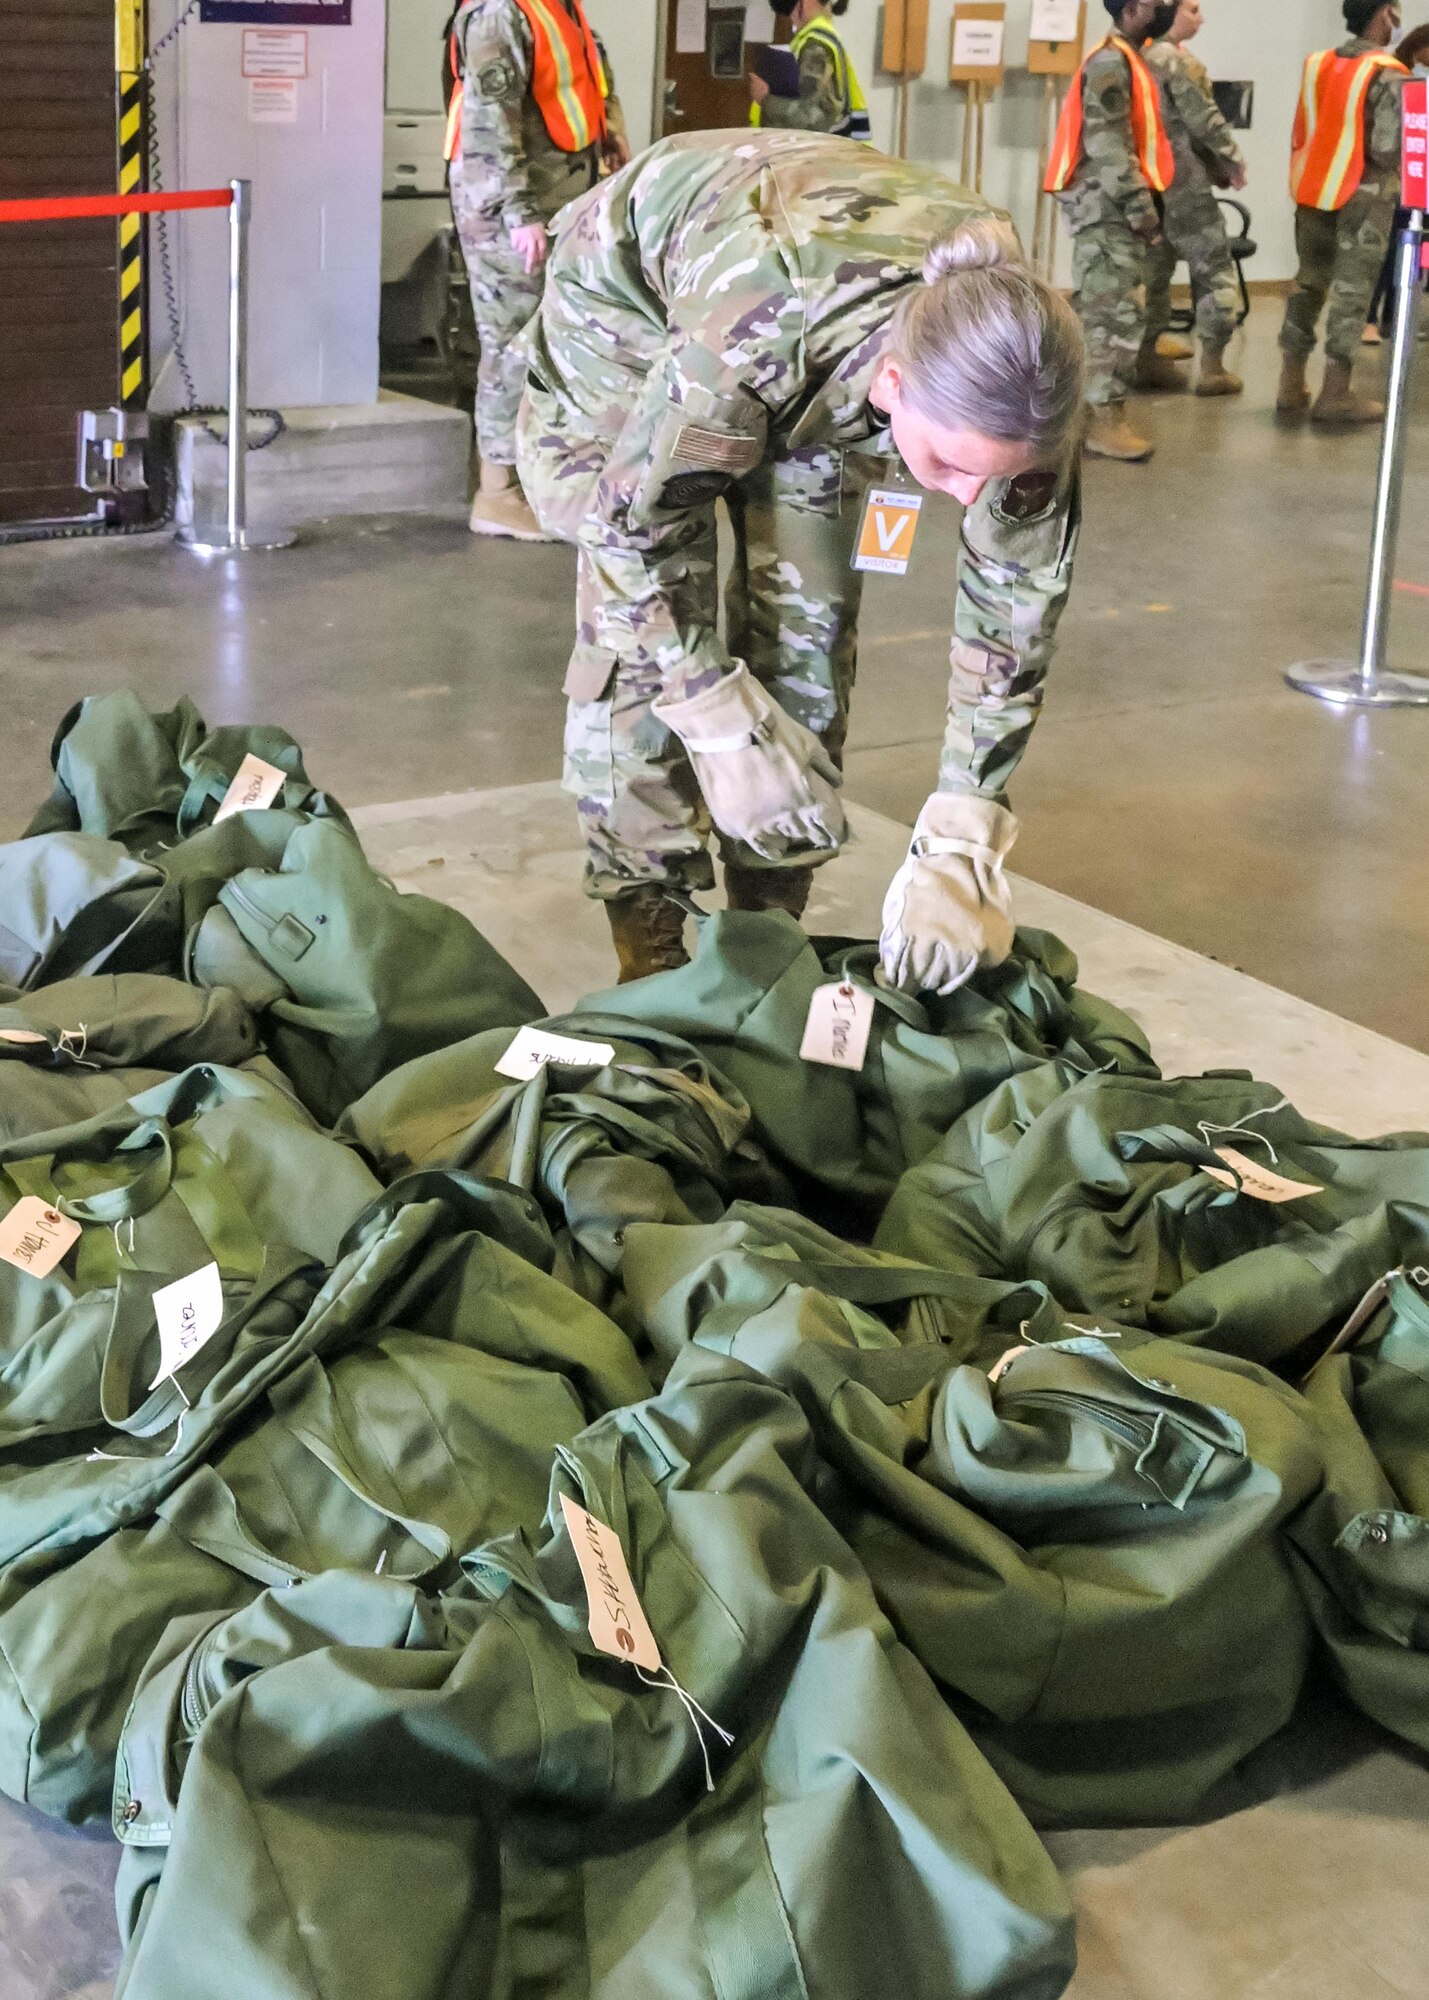 U.S. Air Force Reserve Airmen from the 913th Airlift Group prepare equipment to be palletized as part of the phase 1 deployment exercise June 6, 2021, at Little Rock Air Force Base, Arkansas. The event tested predeployment administrative processes and will identify areas of improvement before a real world deployment. (U.S. Air Force photo by Maj. Ashley Walker)